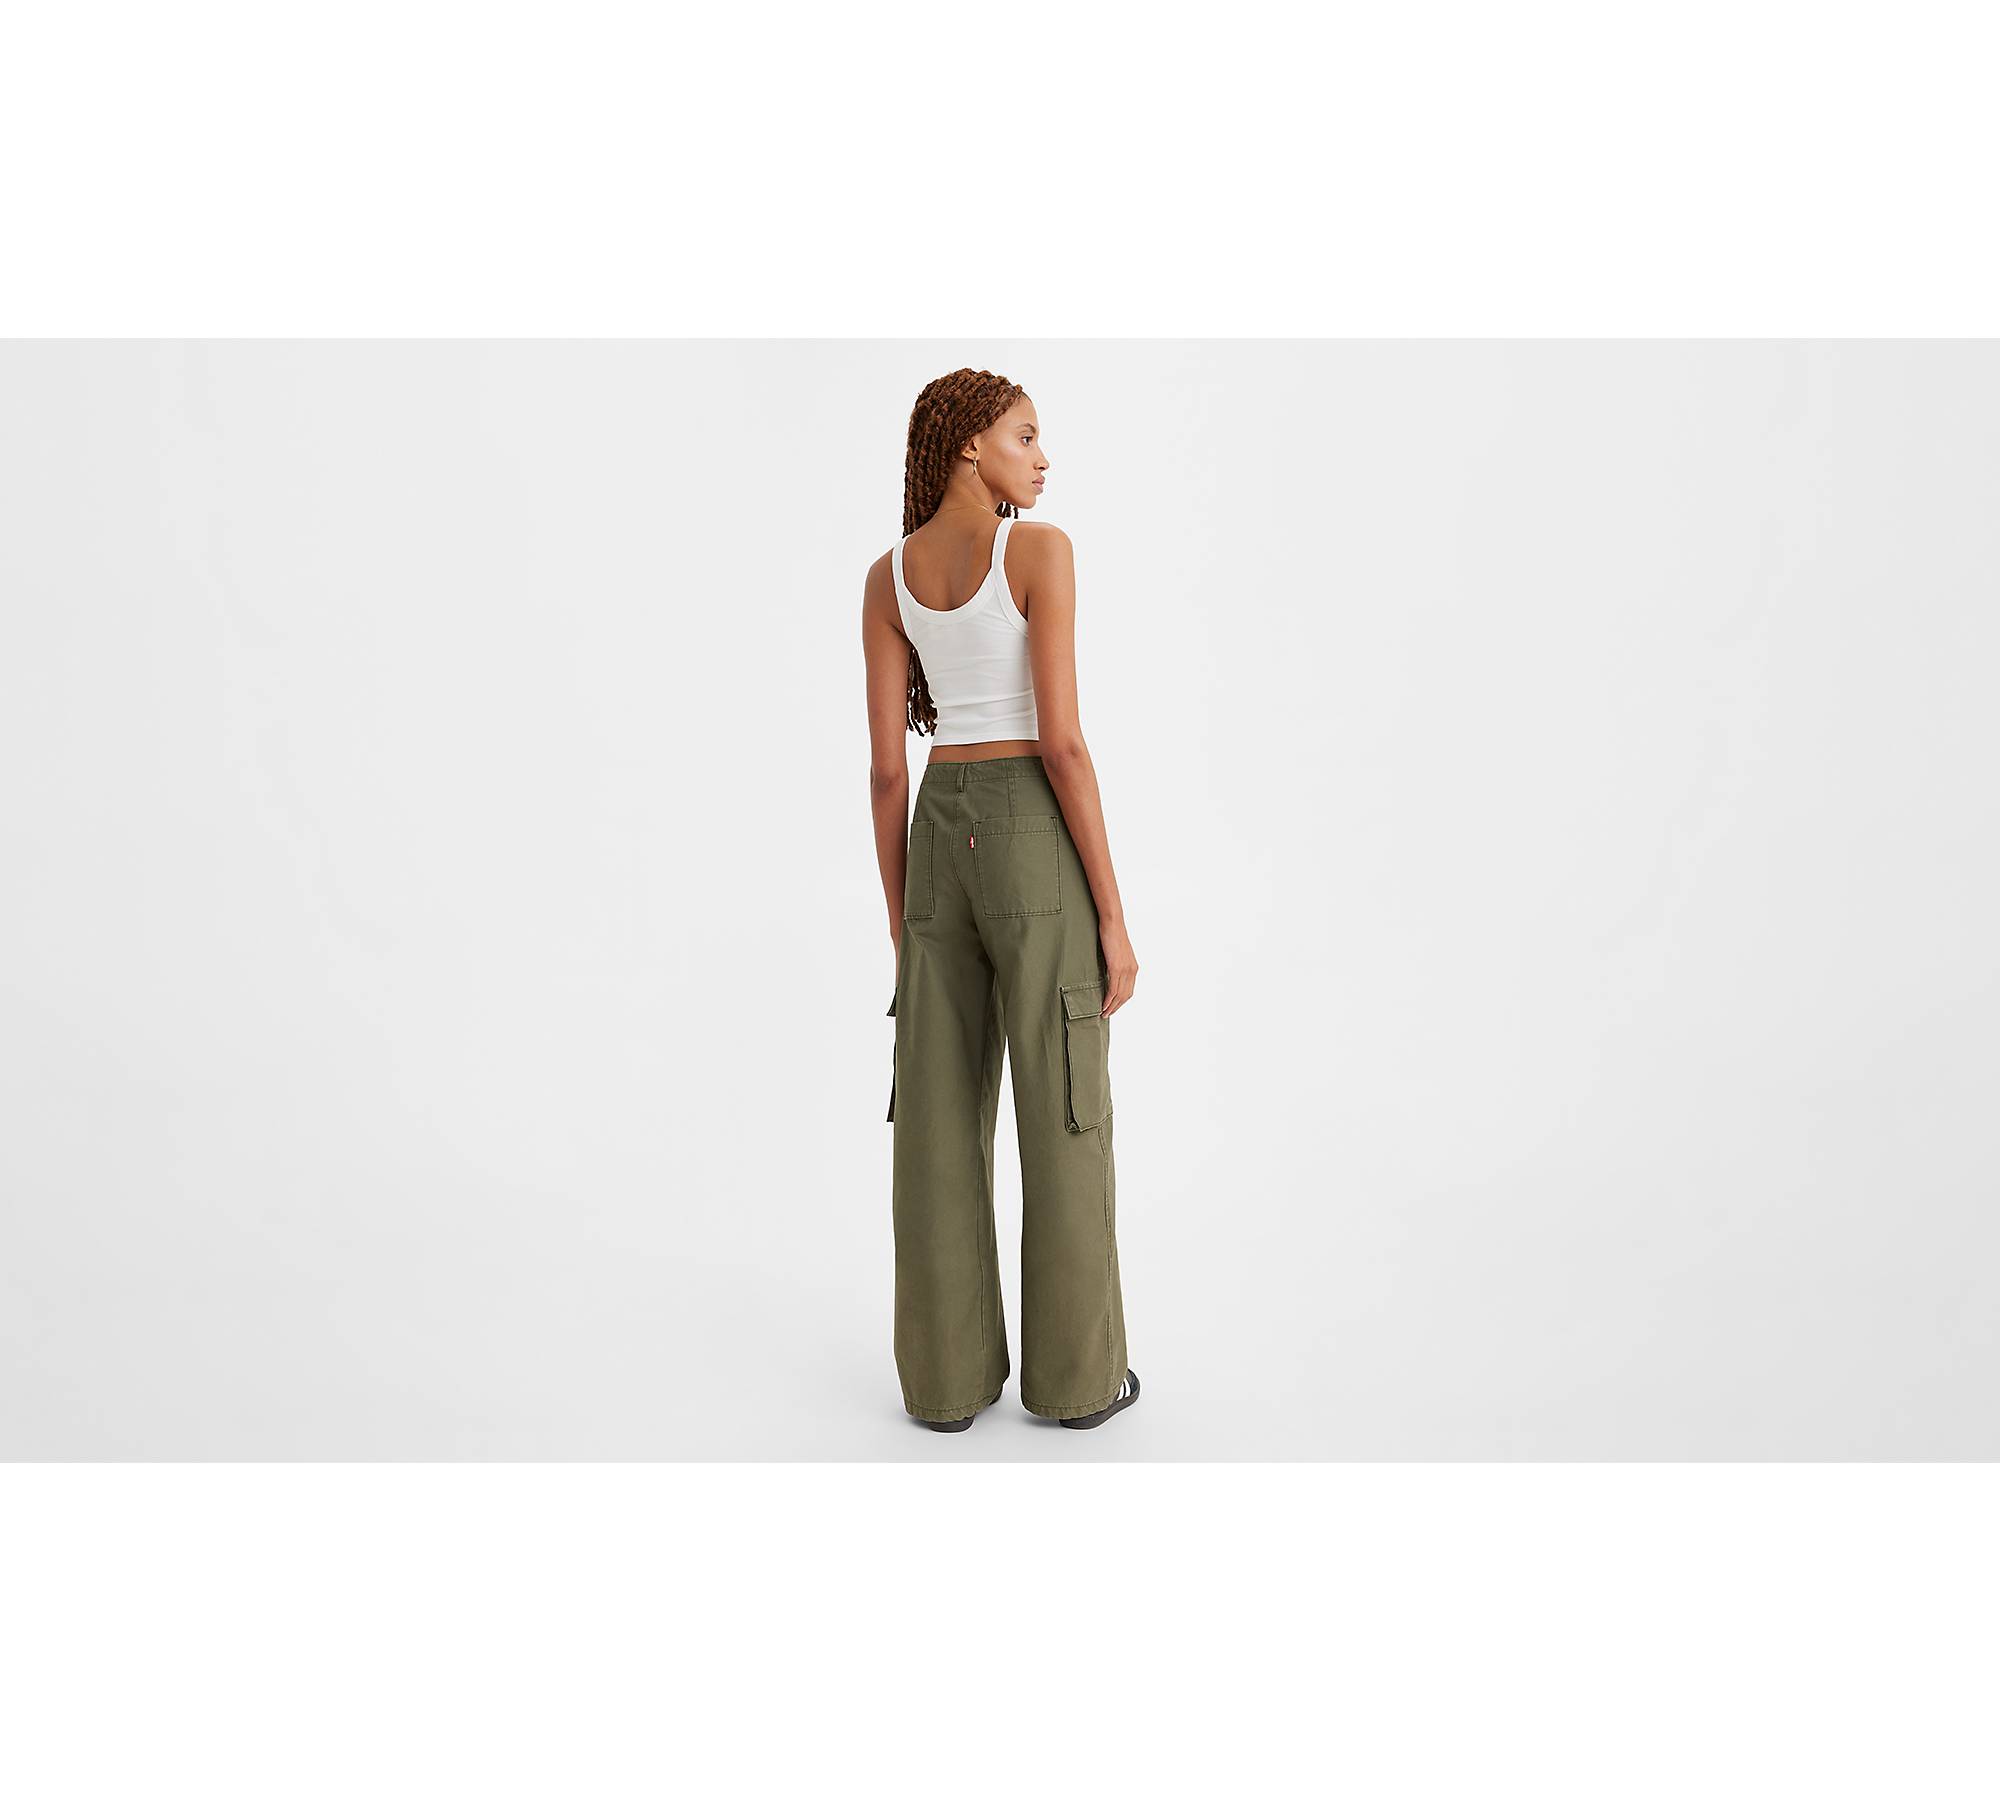 Levi's Baggy Cargo Pant - Women's 26 / 30 Olive Night